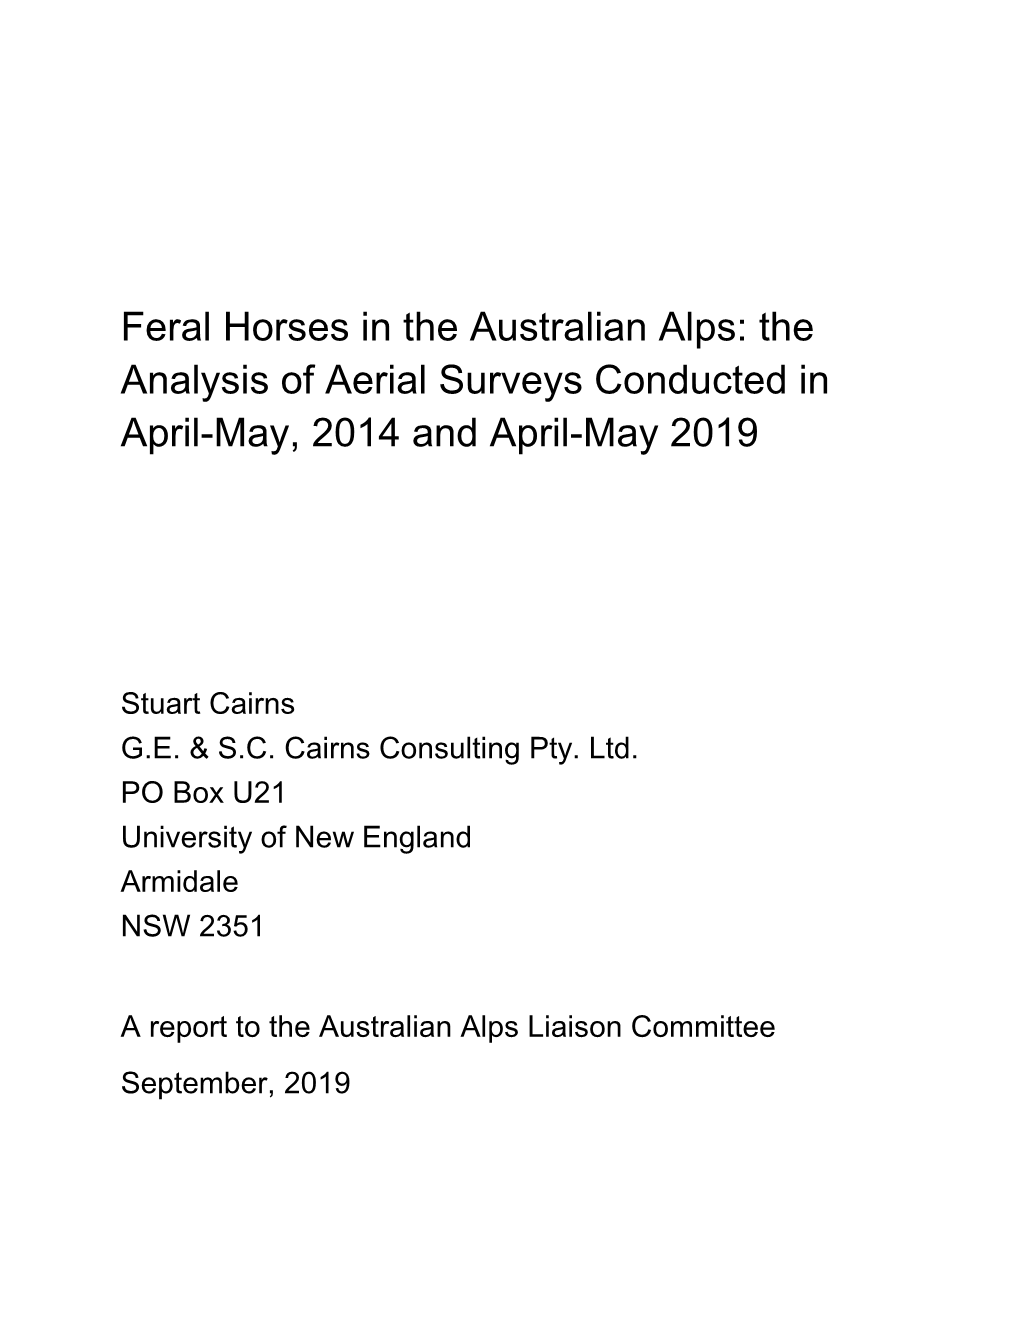 Feral Horses in the Australian Alps: the Analysis of Aerial Surveys Conducted in April-May, 2014 and April-May 2019